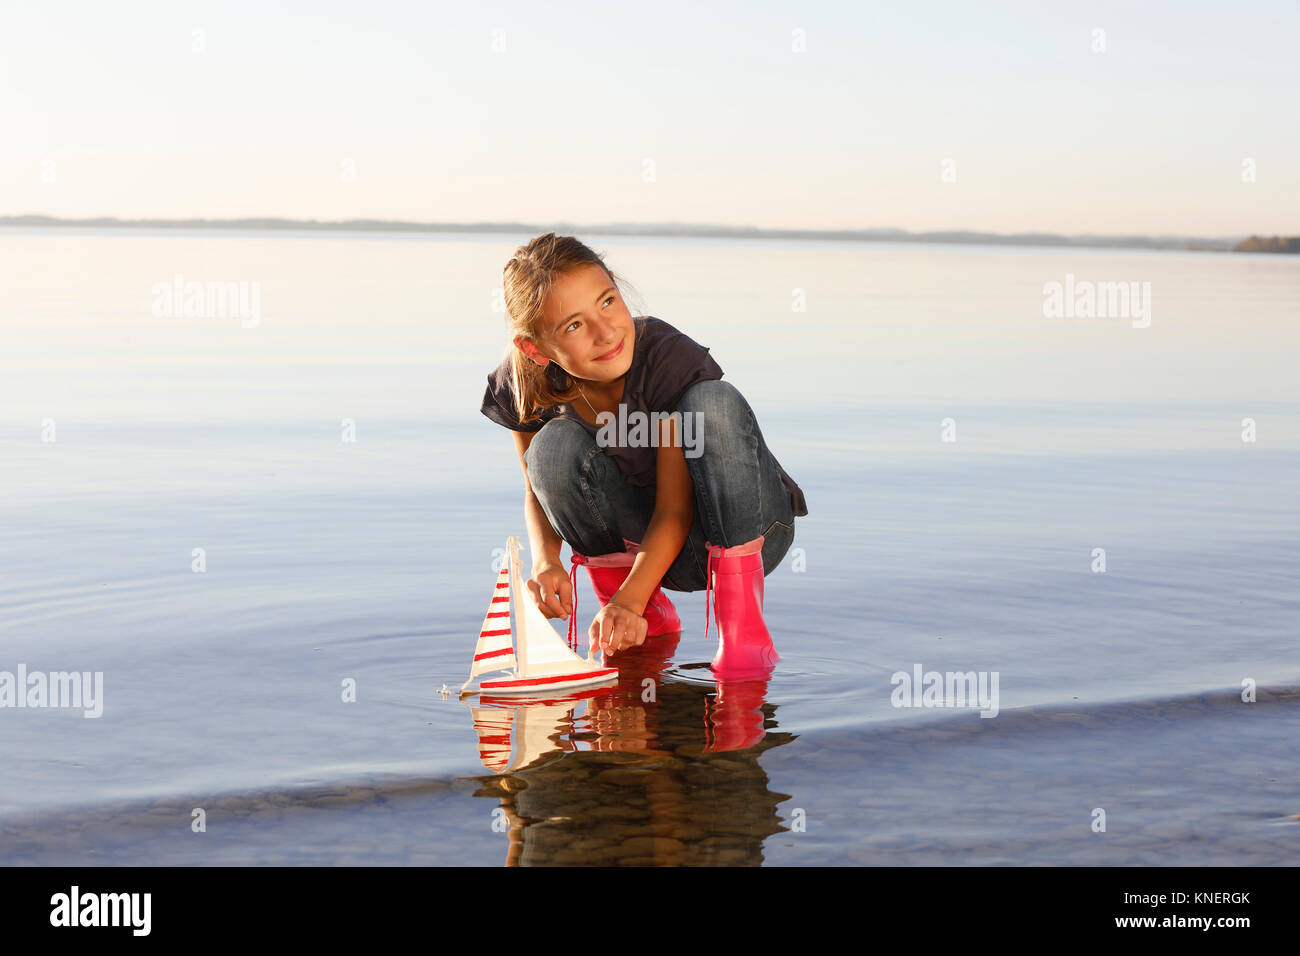 Young girl floating toy boat on water Stock Photo